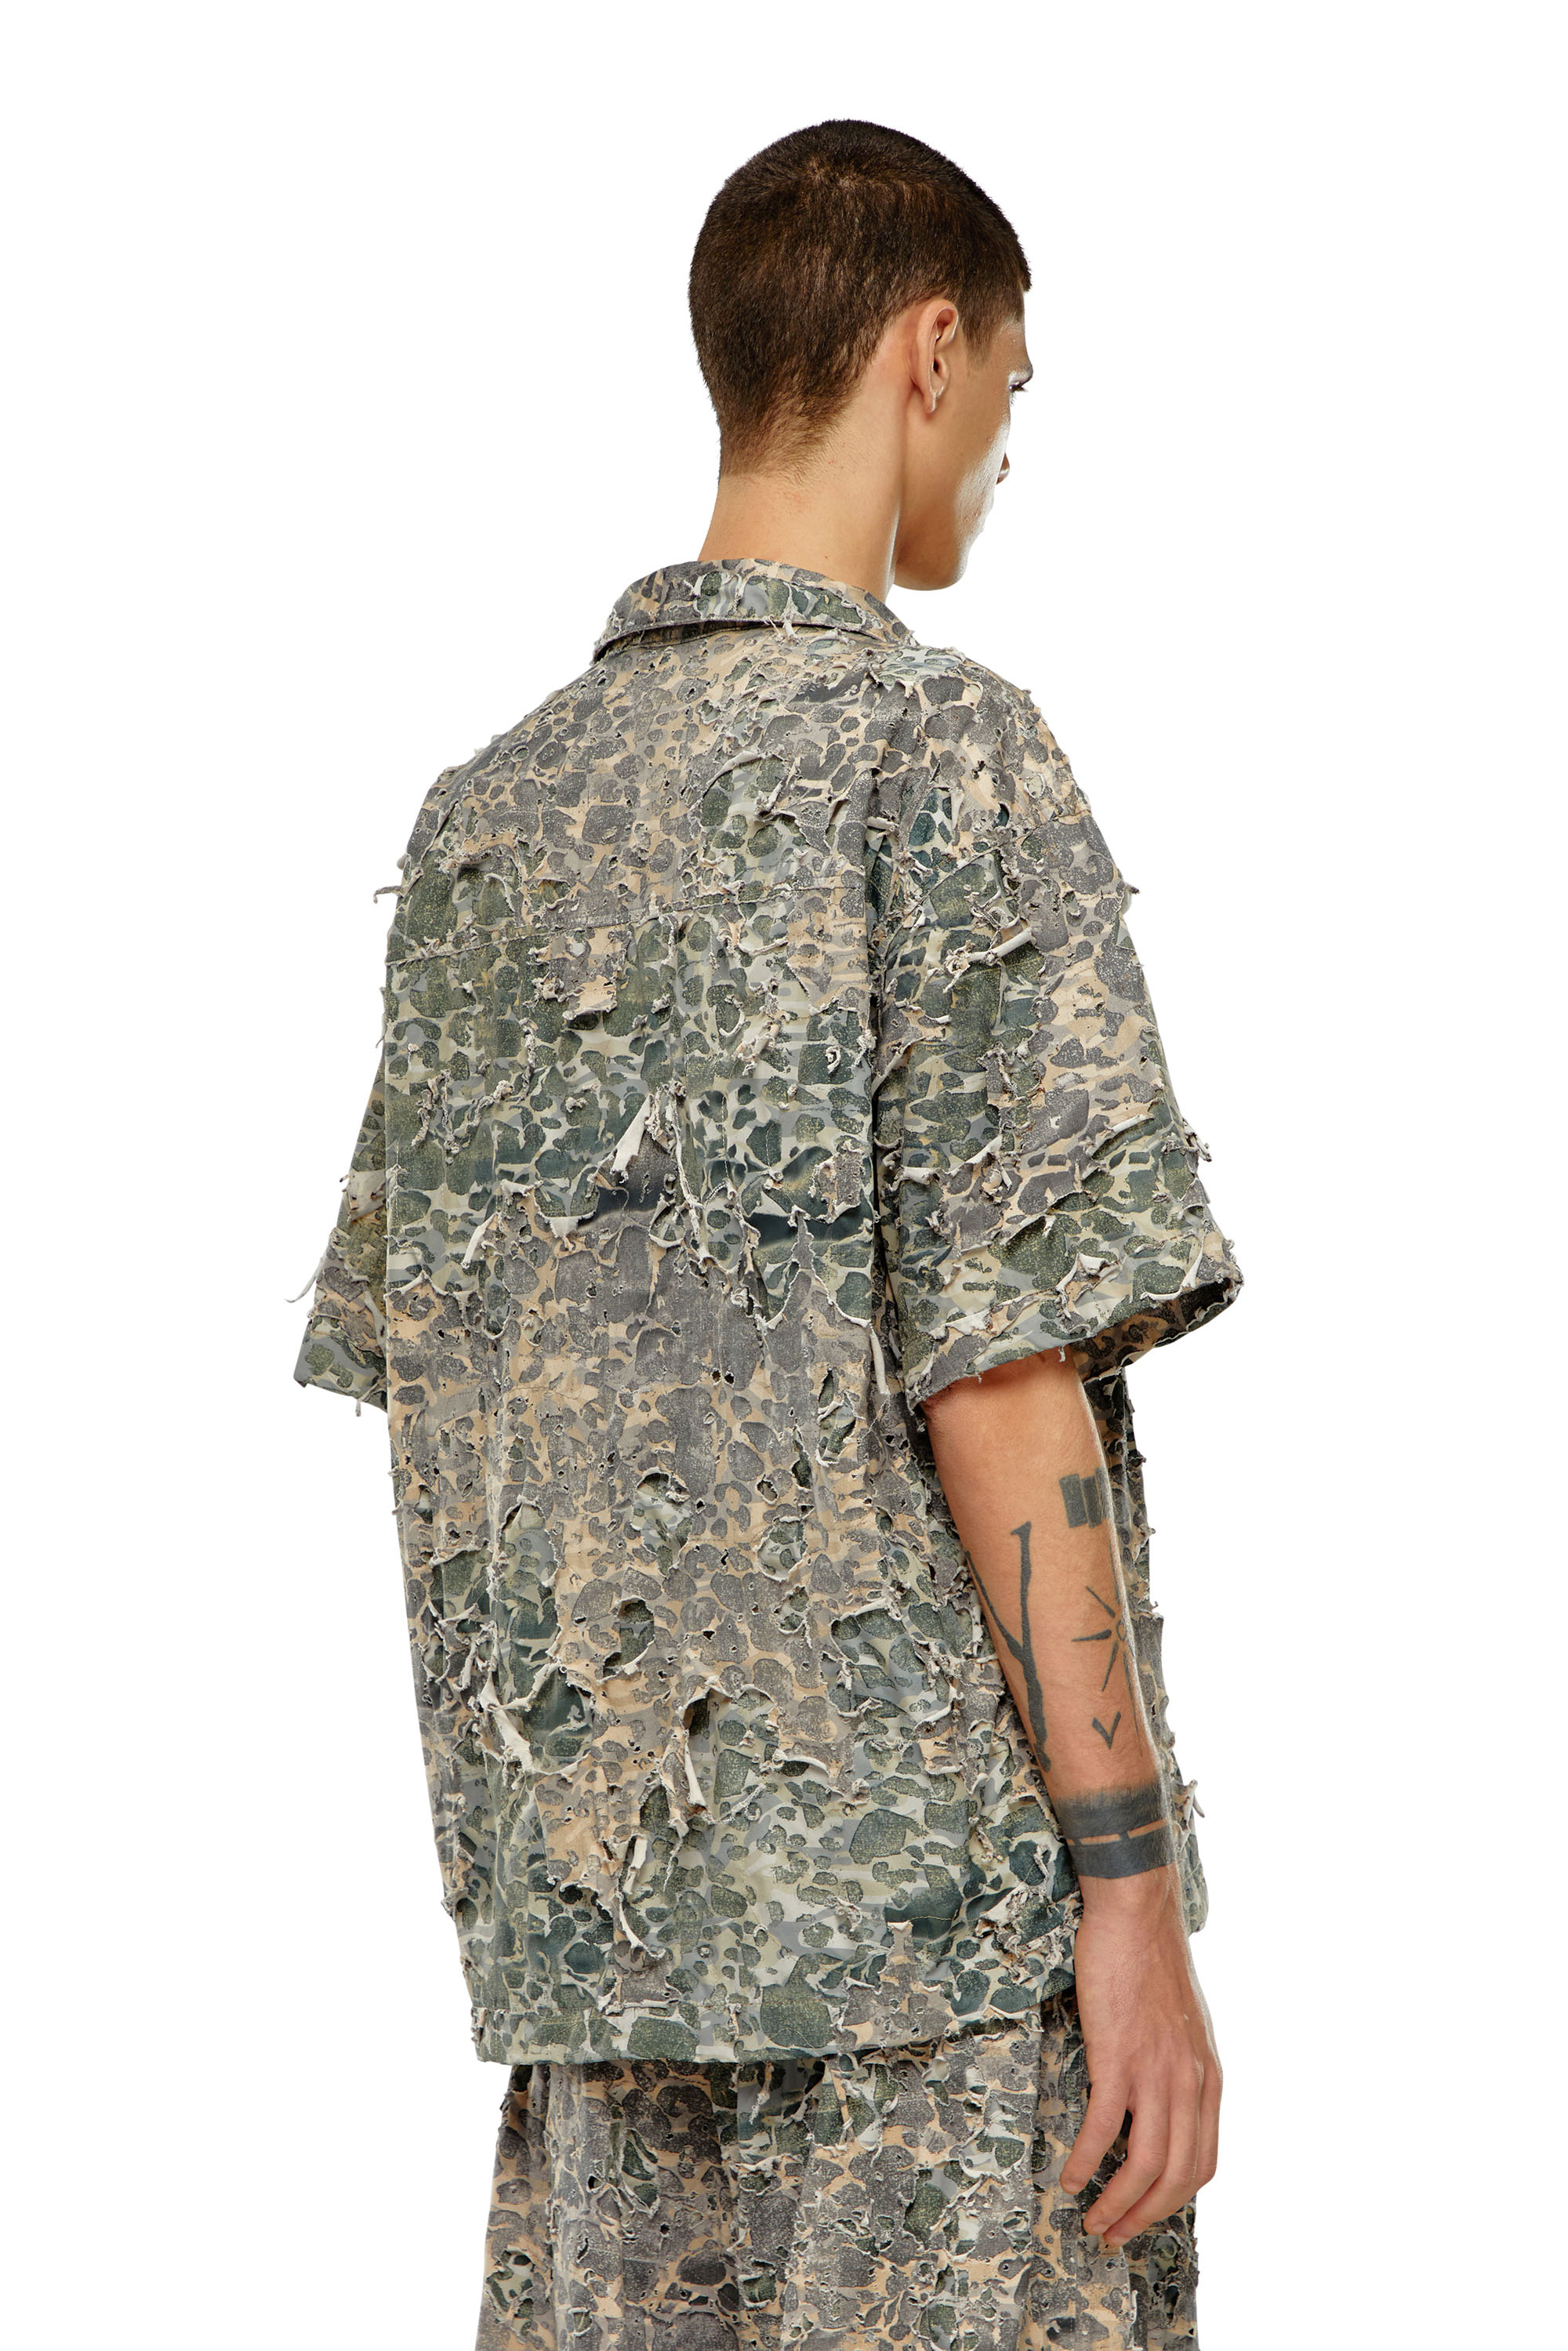 Diesel - S-HOCKNEY-CAMU, Man Camo shirt with destroyed finish in Multicolor - Image 4